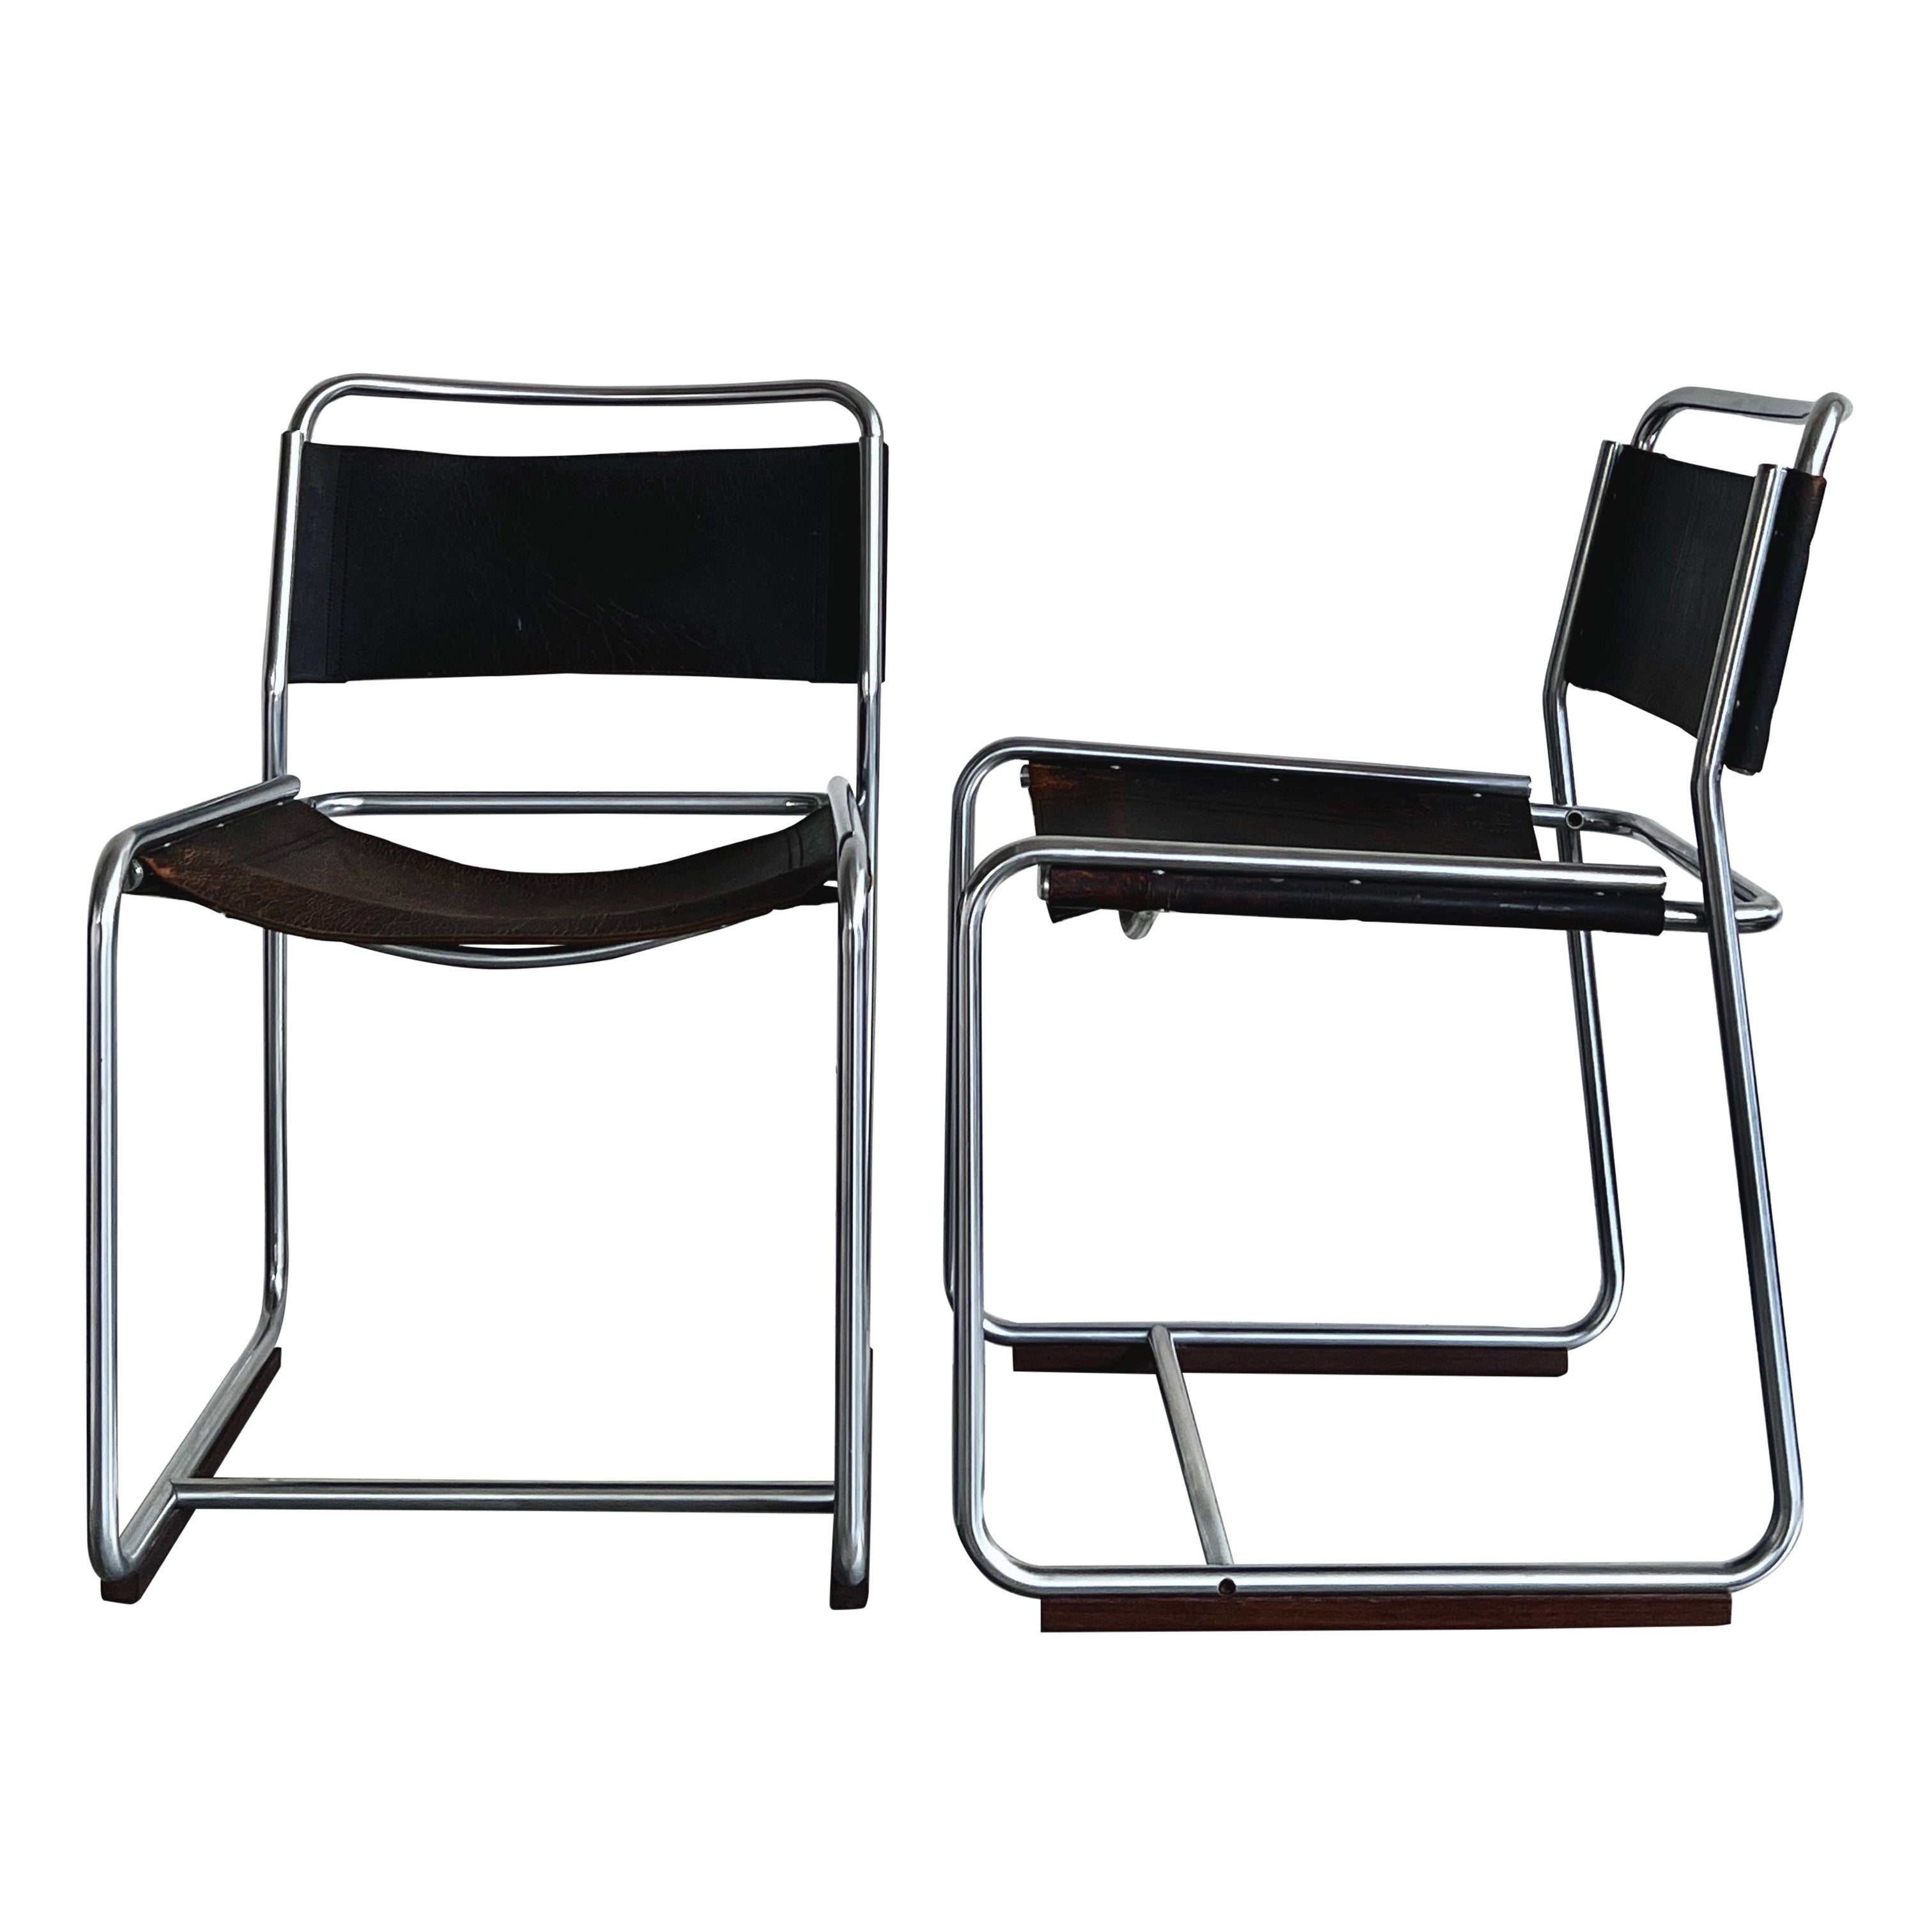 Pair of SE 18 chairs by Bataille & Ibens for 't Spectrum, 1971